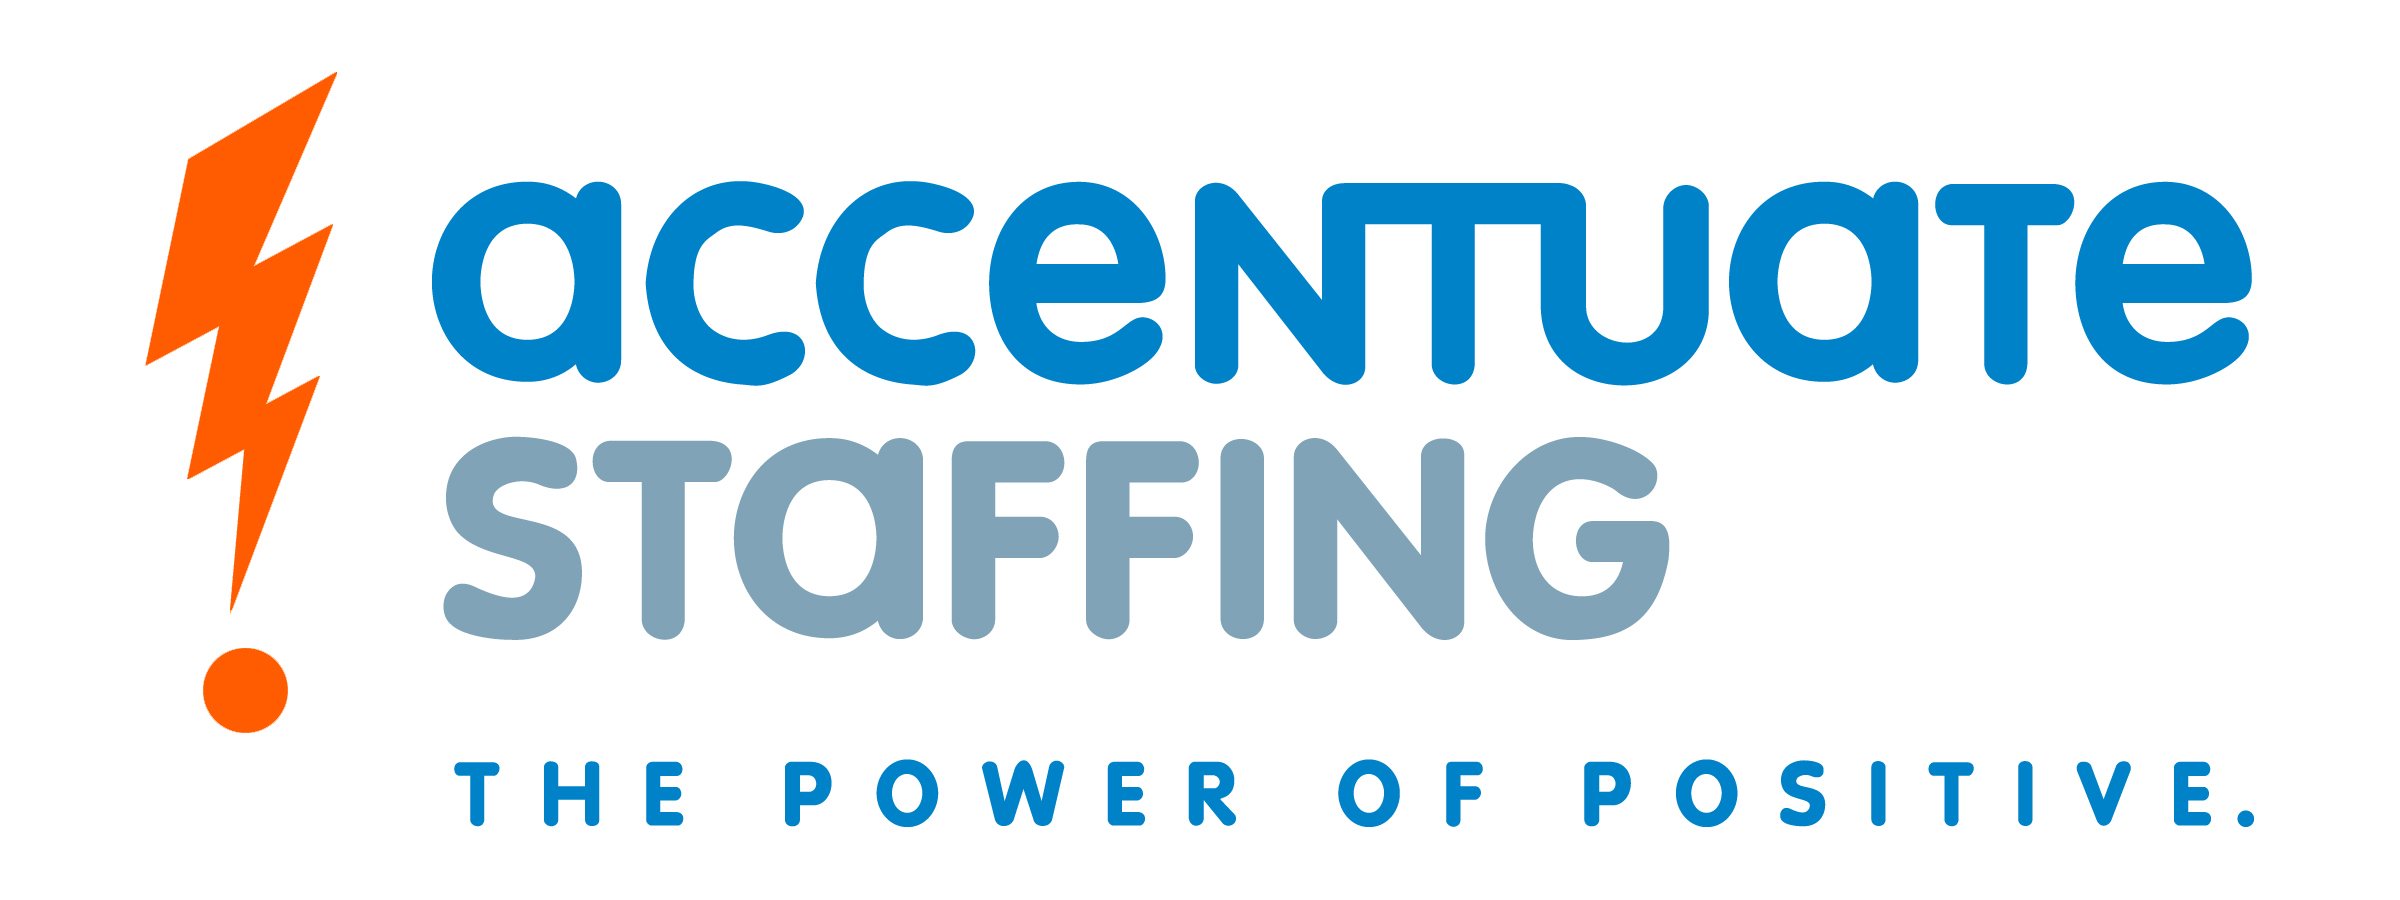 Accentuate Staffing